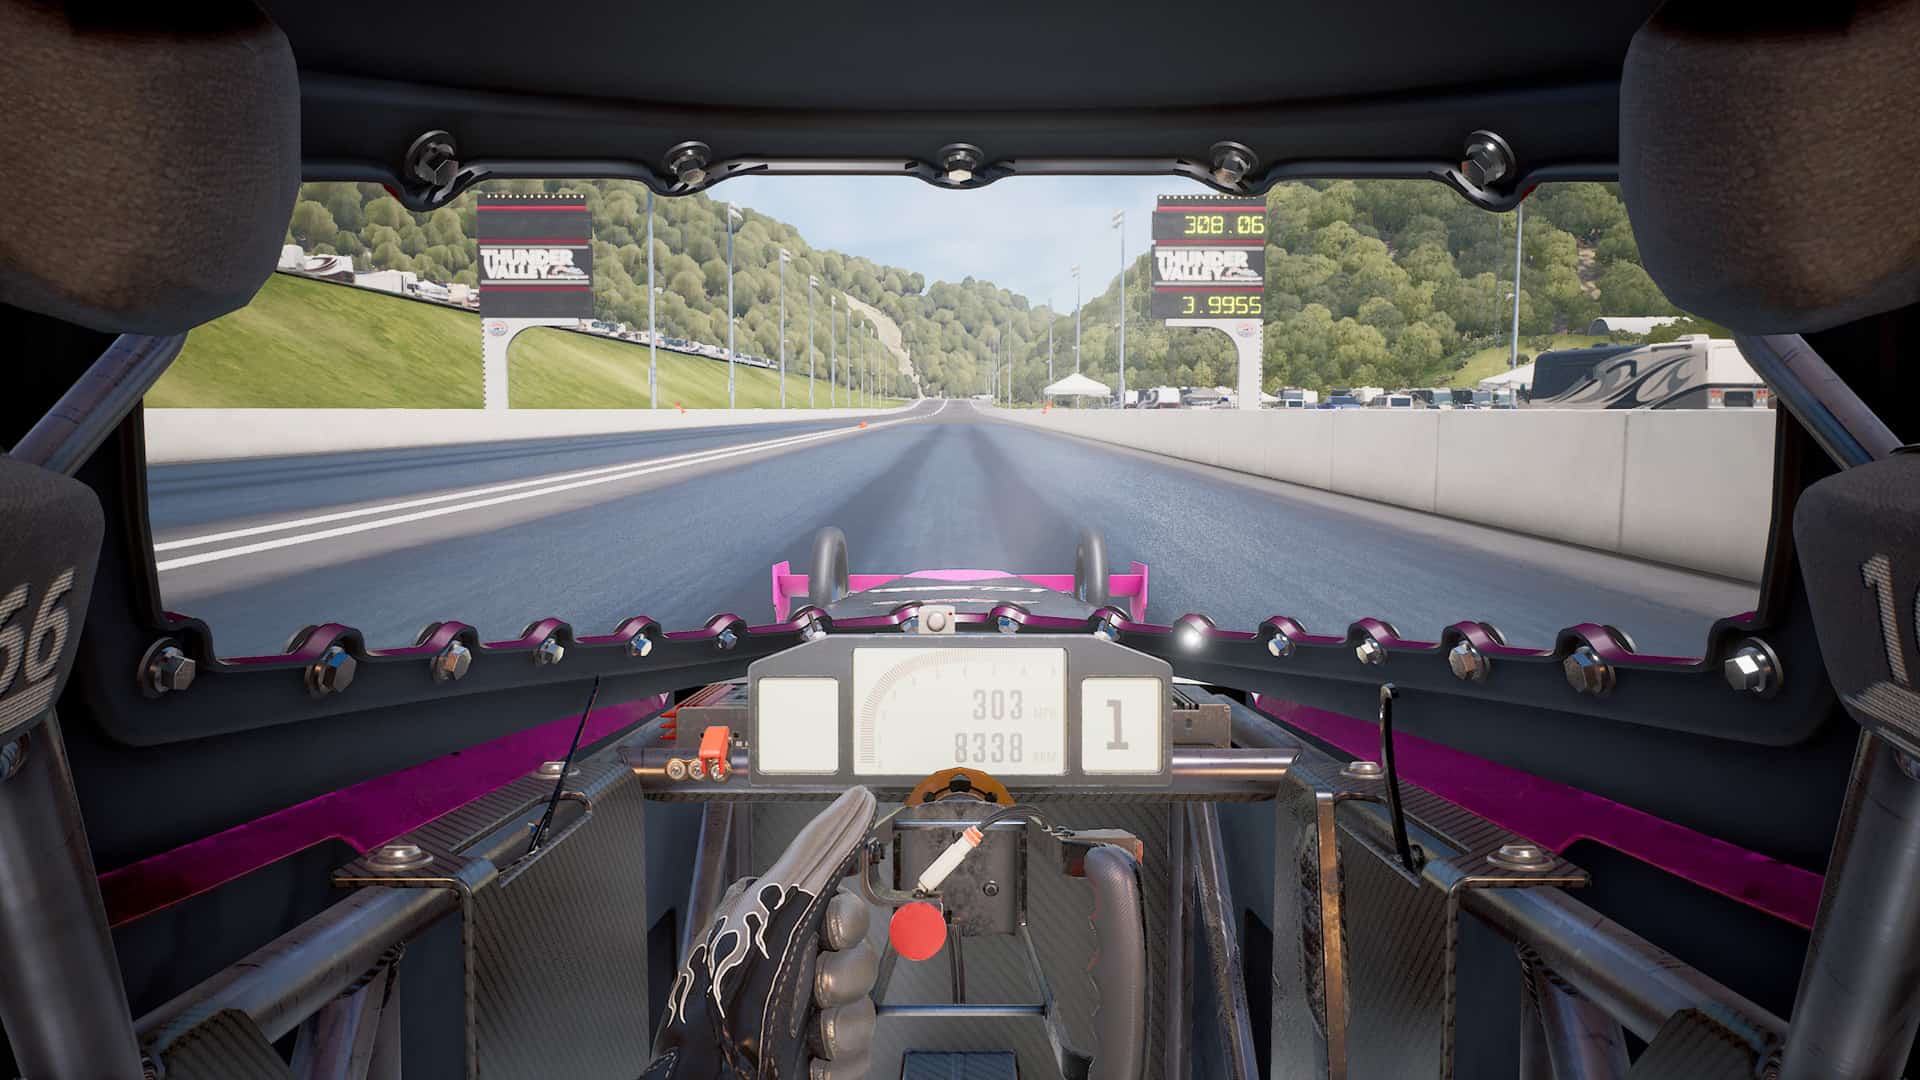 NHRA Speed For All Review: Gaming a quarter mile at a time